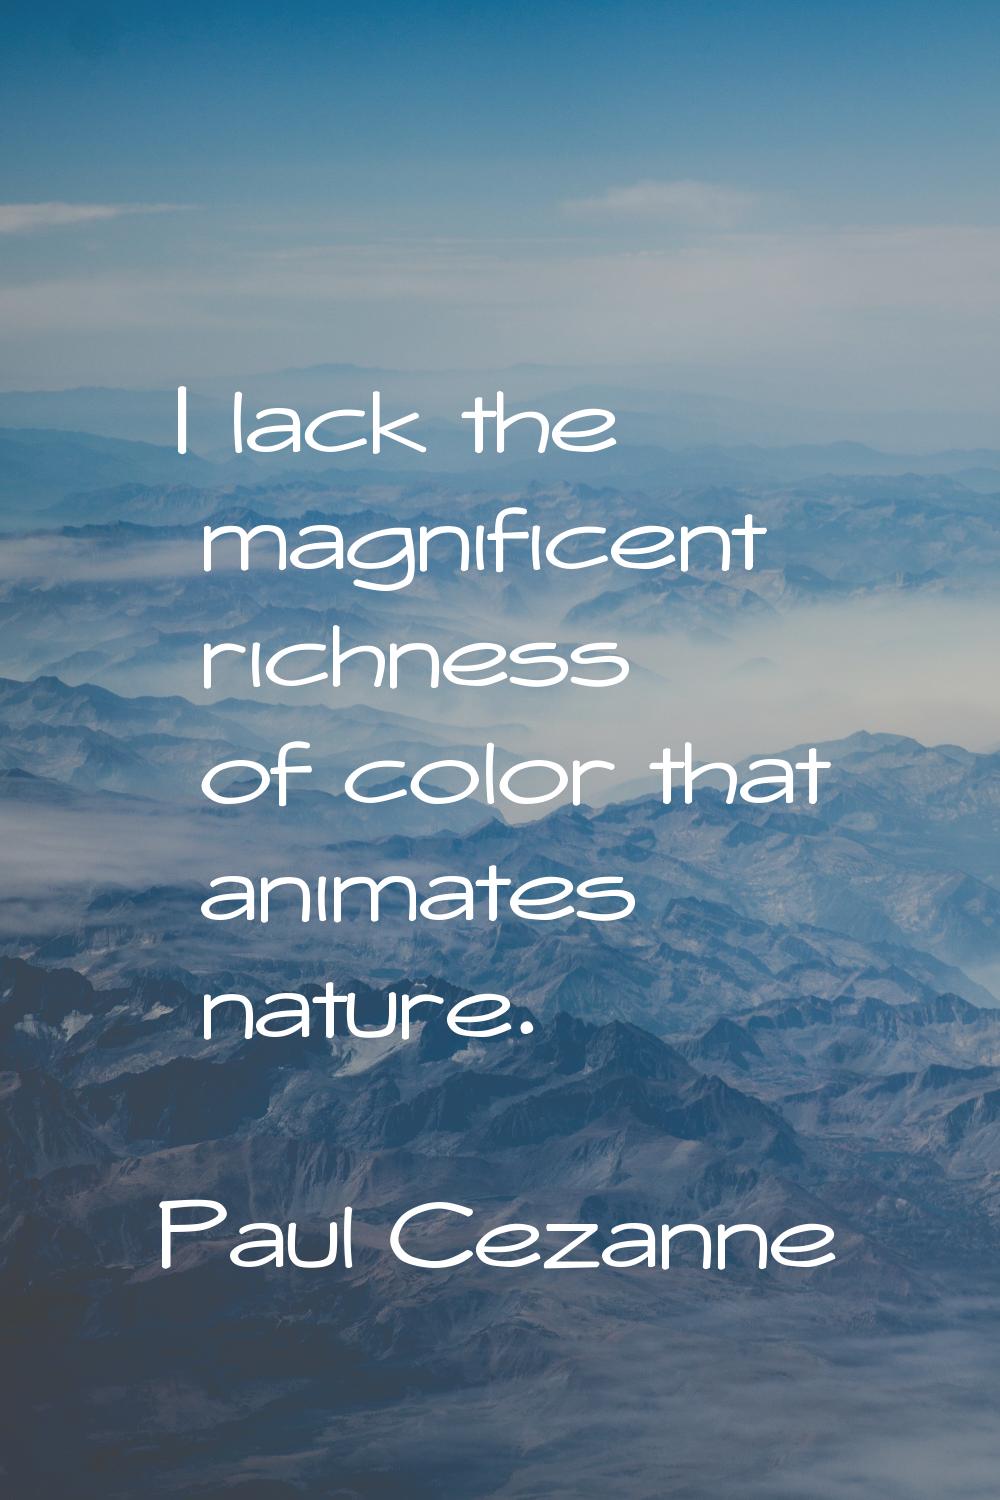 I lack the magnificent richness of color that animates nature.